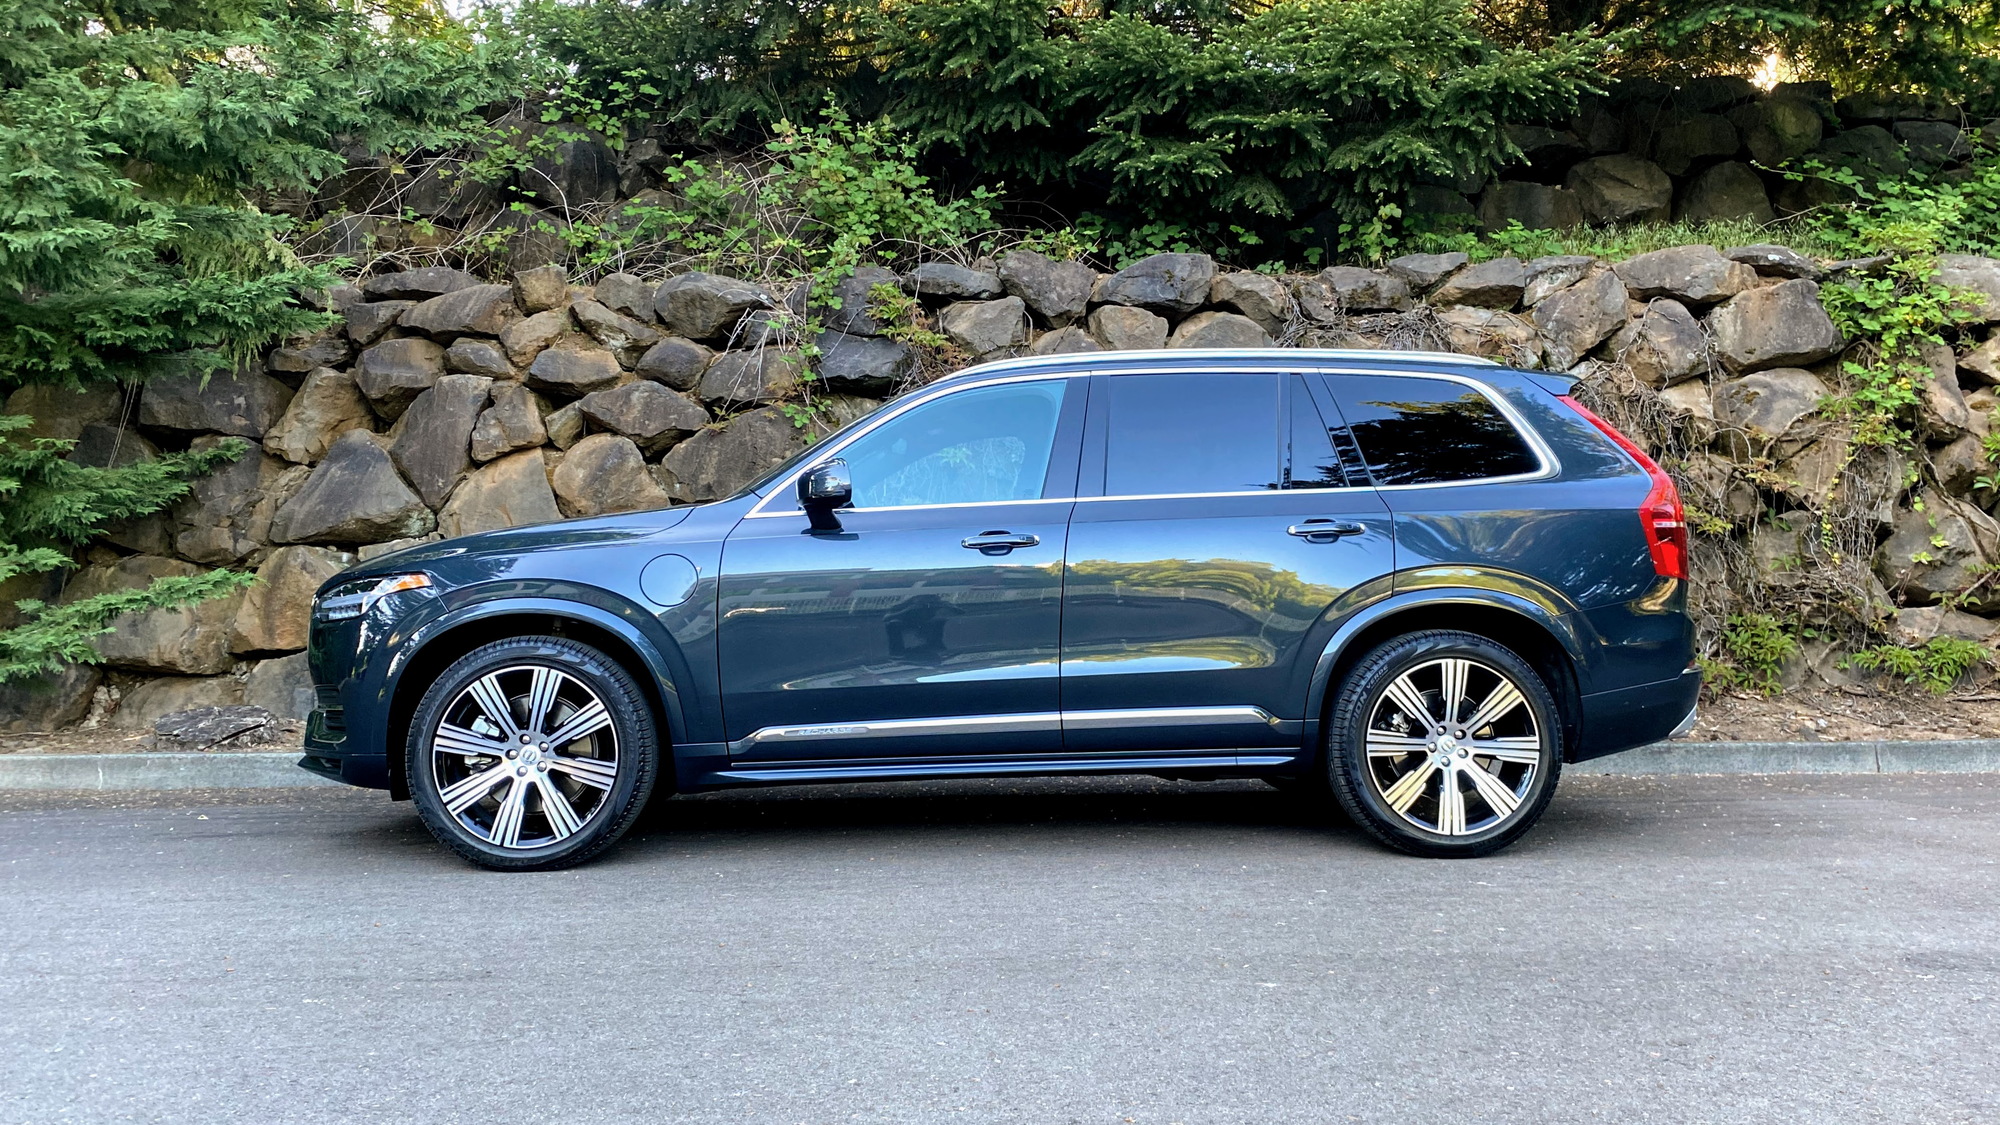 2021 Volvo XC90 T8 Inscription  -  review update, June 2021